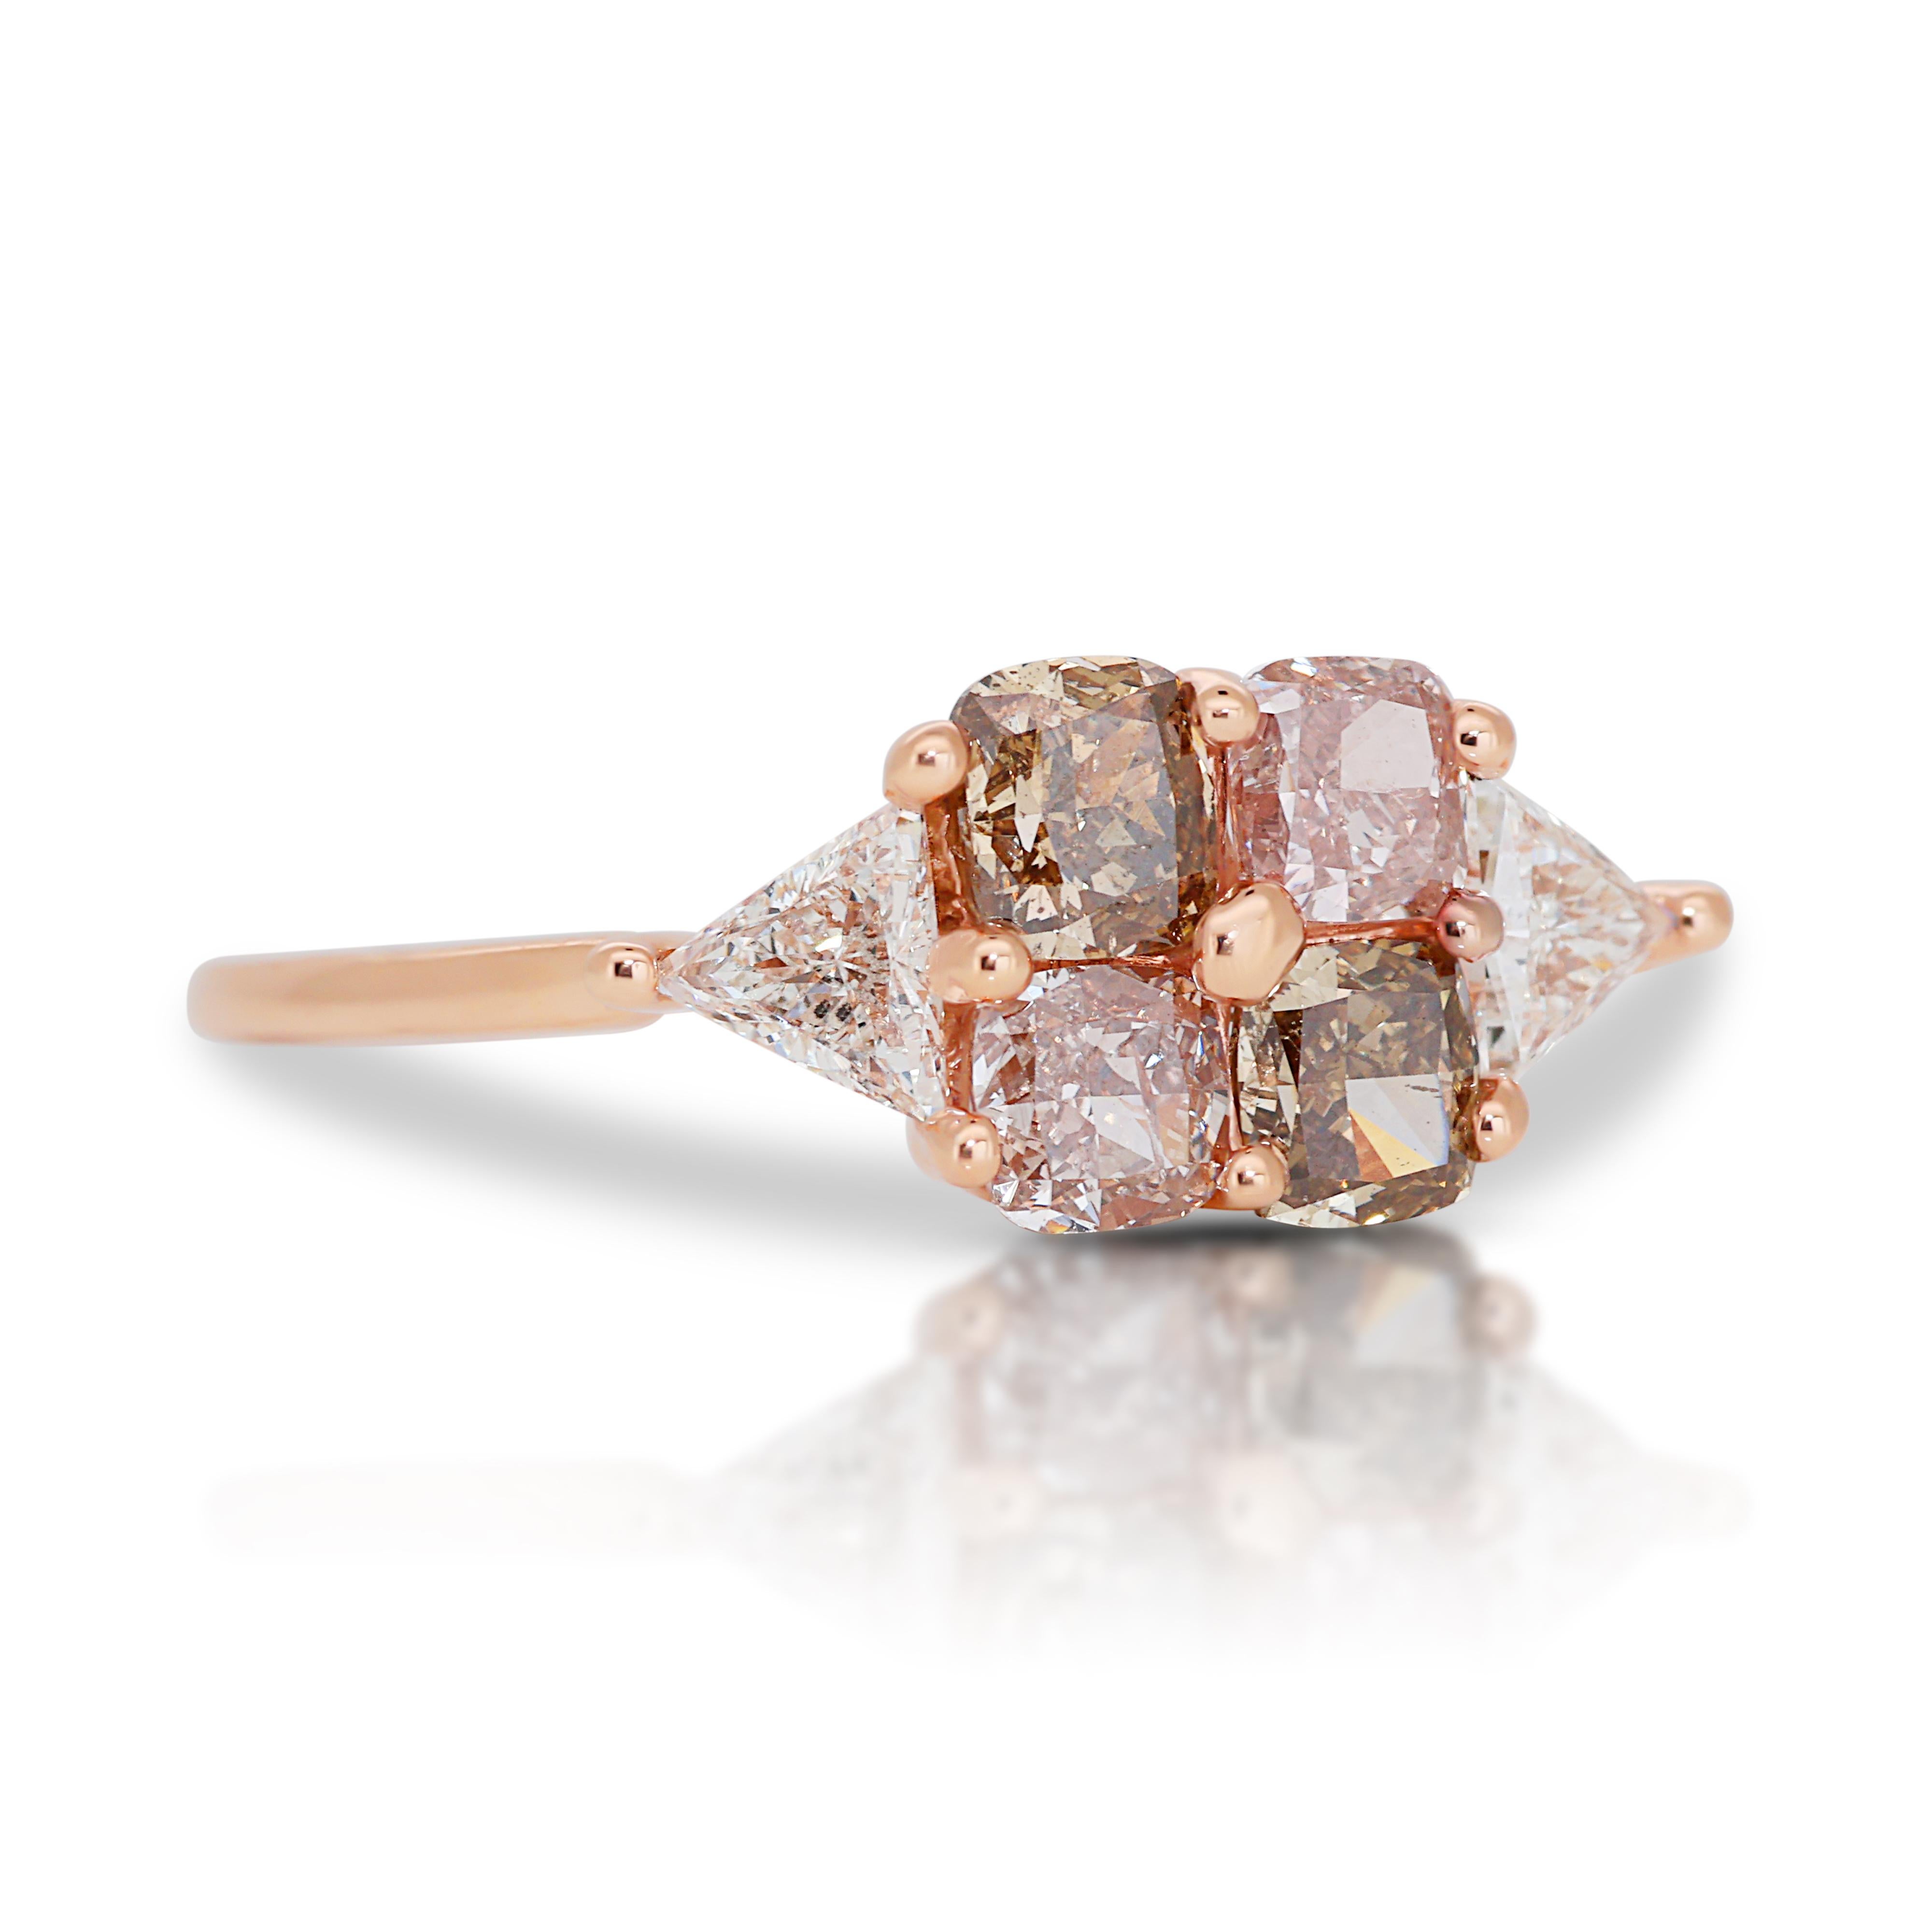 Vibrant and one-of-a-kind 14k Rose Gold Fancy-Colored Diamond Ring w/1.31 ct - IGI Certified

This 14k Rose Gold Fancy-Colored Ring stands as a testament to the beauty of diversity and the allure of natural colors. This exquisite piece features 4